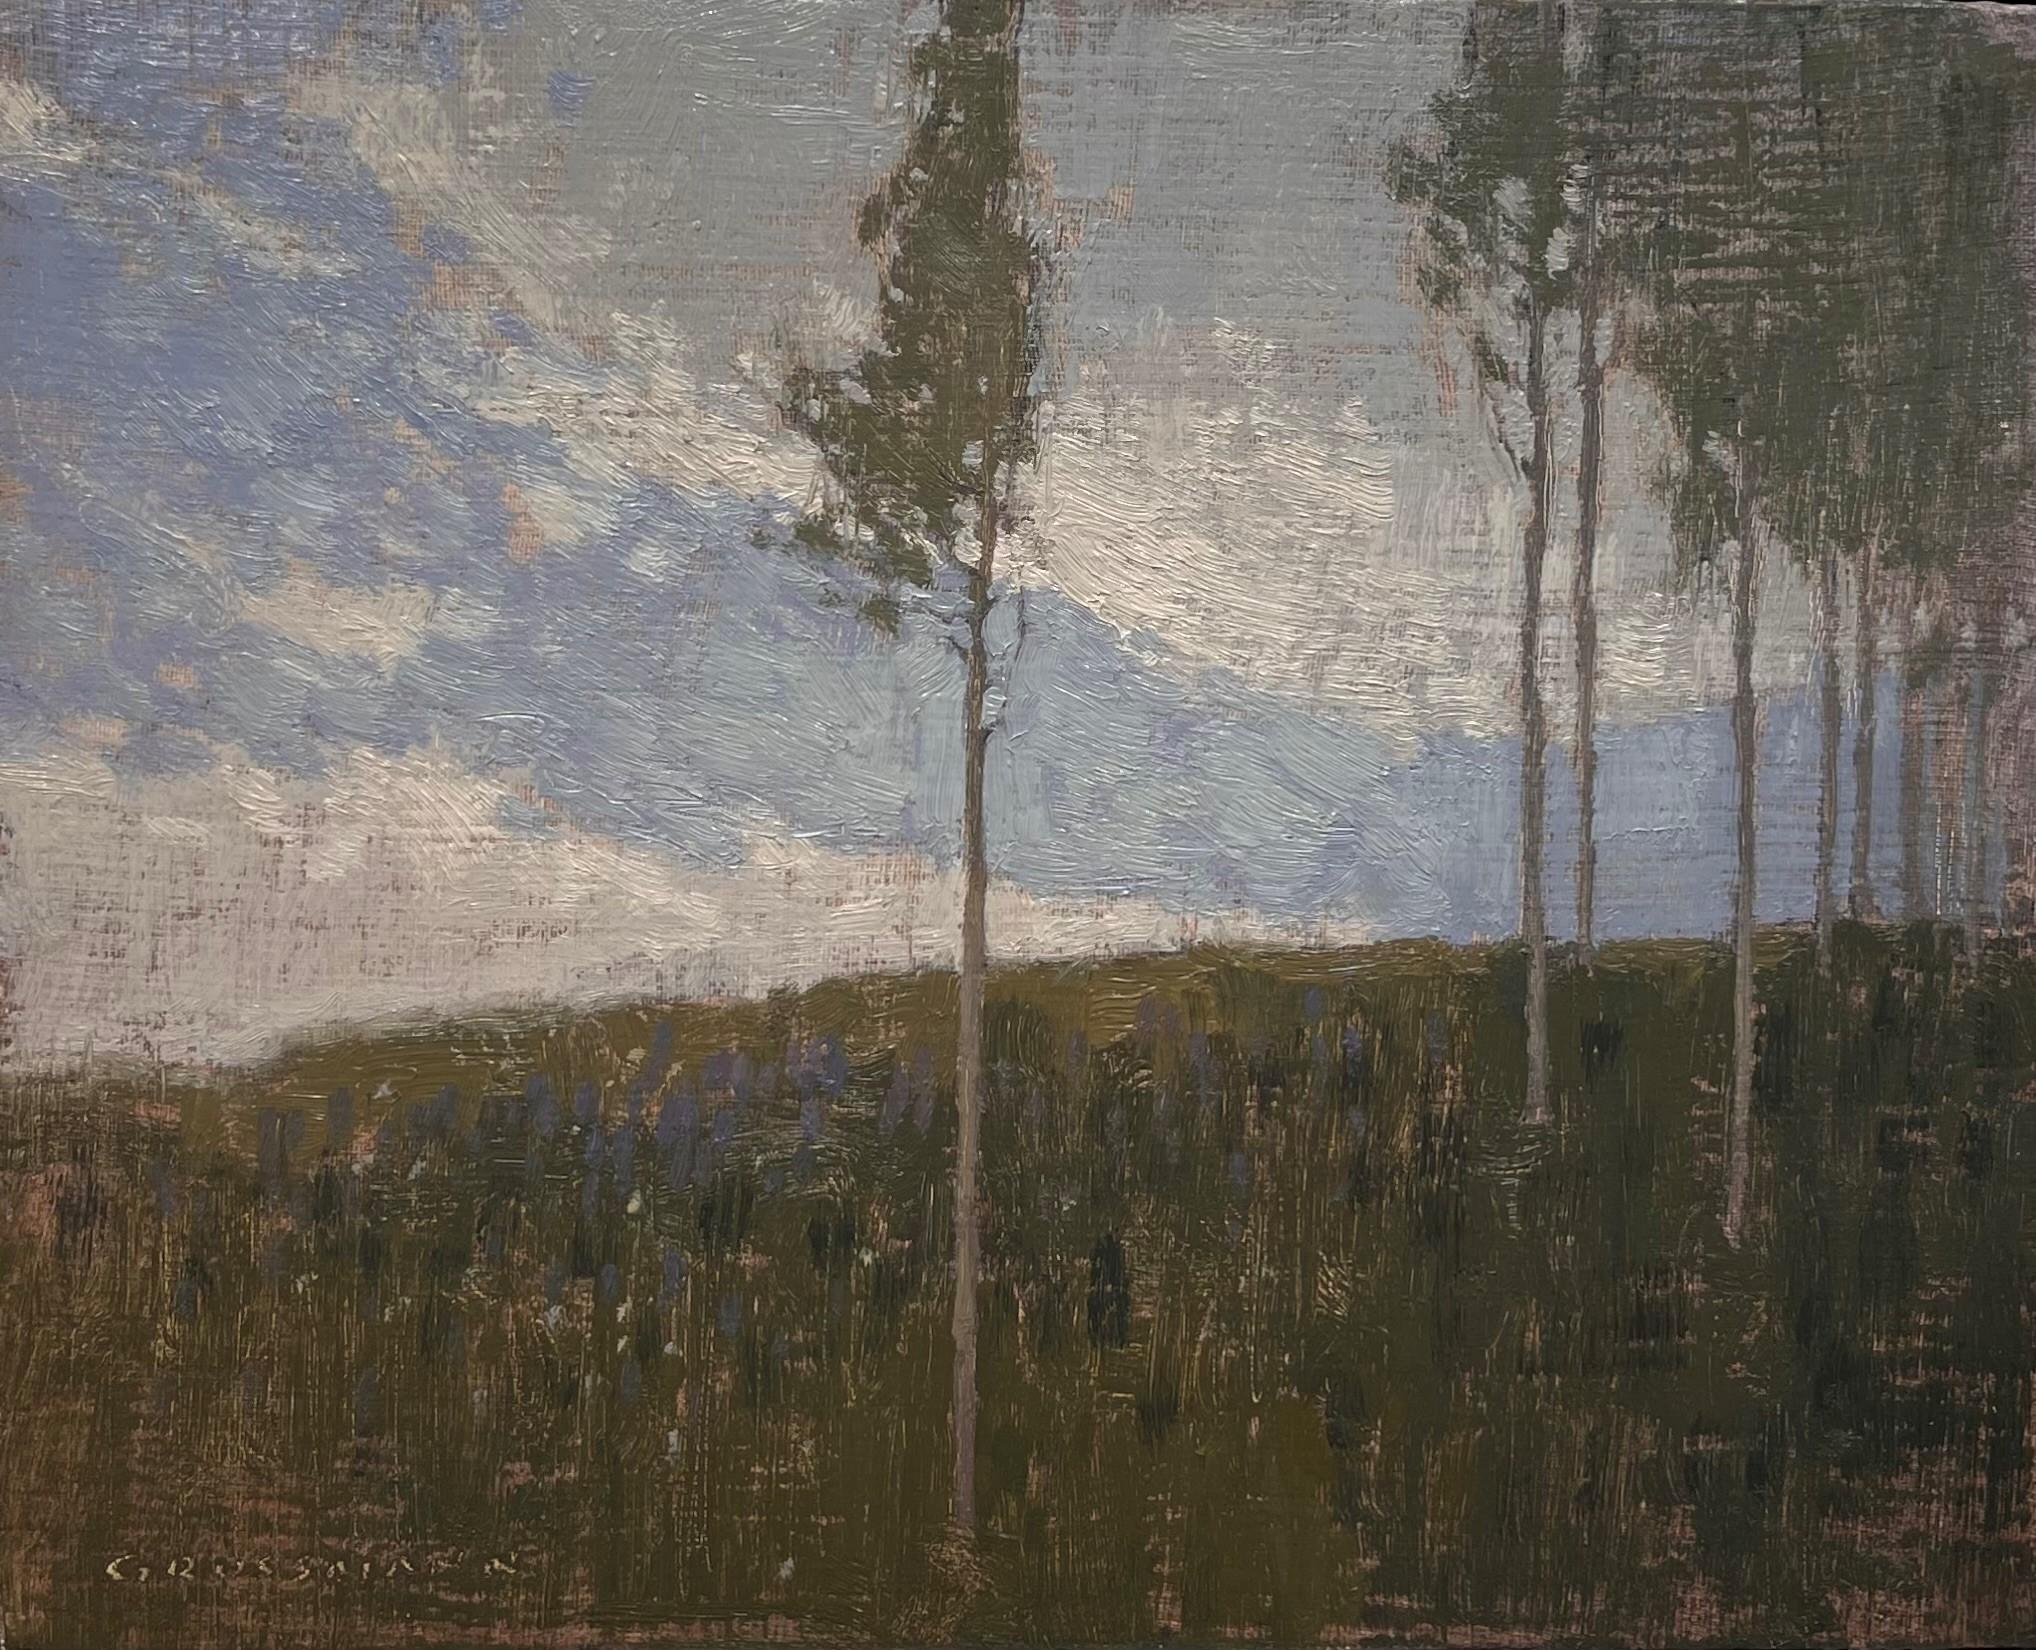 David Grossmann Landscape Painting - "Early Summer Aspen and Clouds", Oil Painting